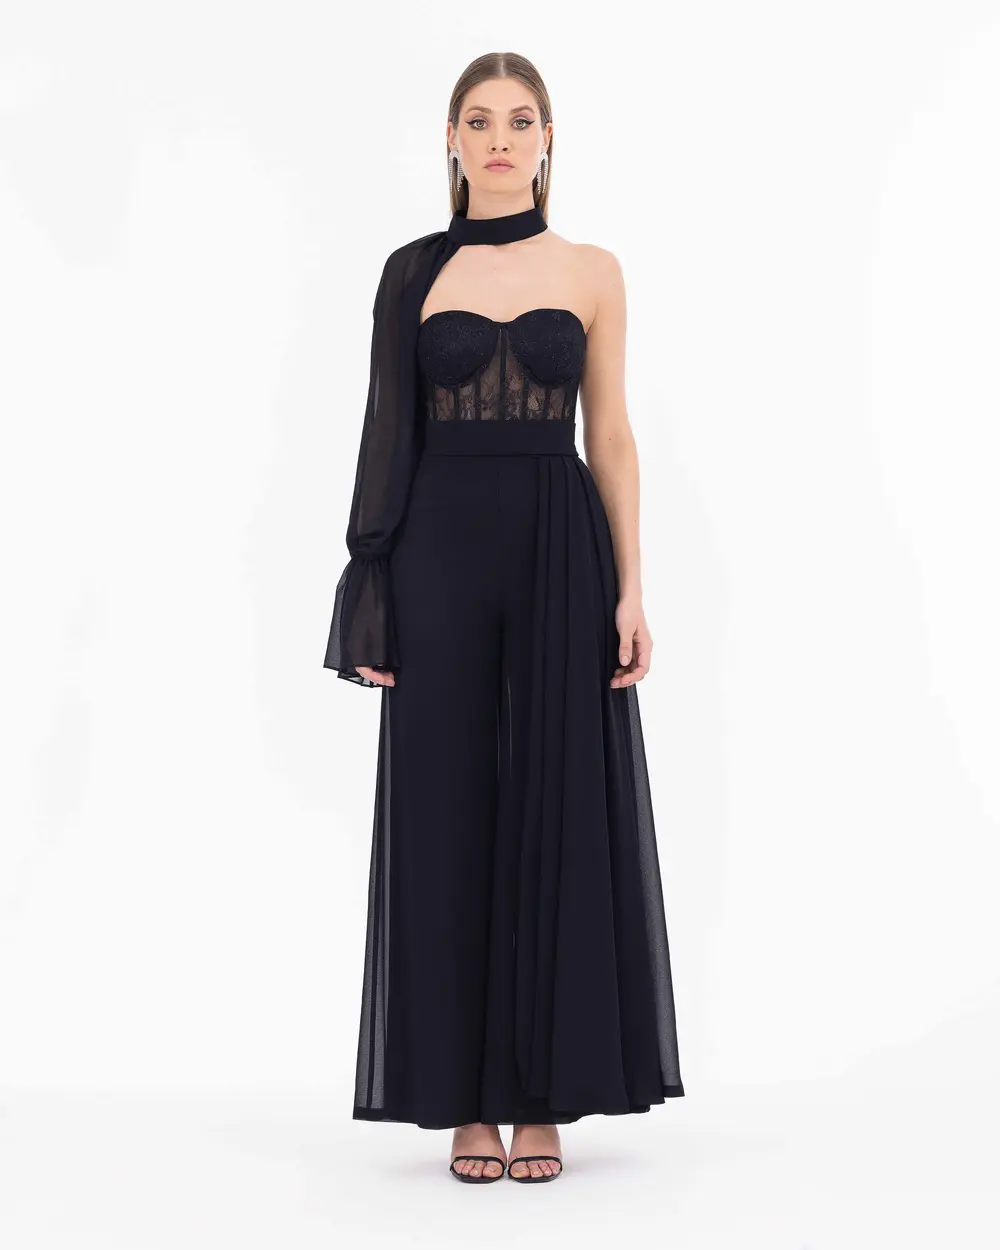 Bust Cup Detachable Sleeve Lace Evening Dress